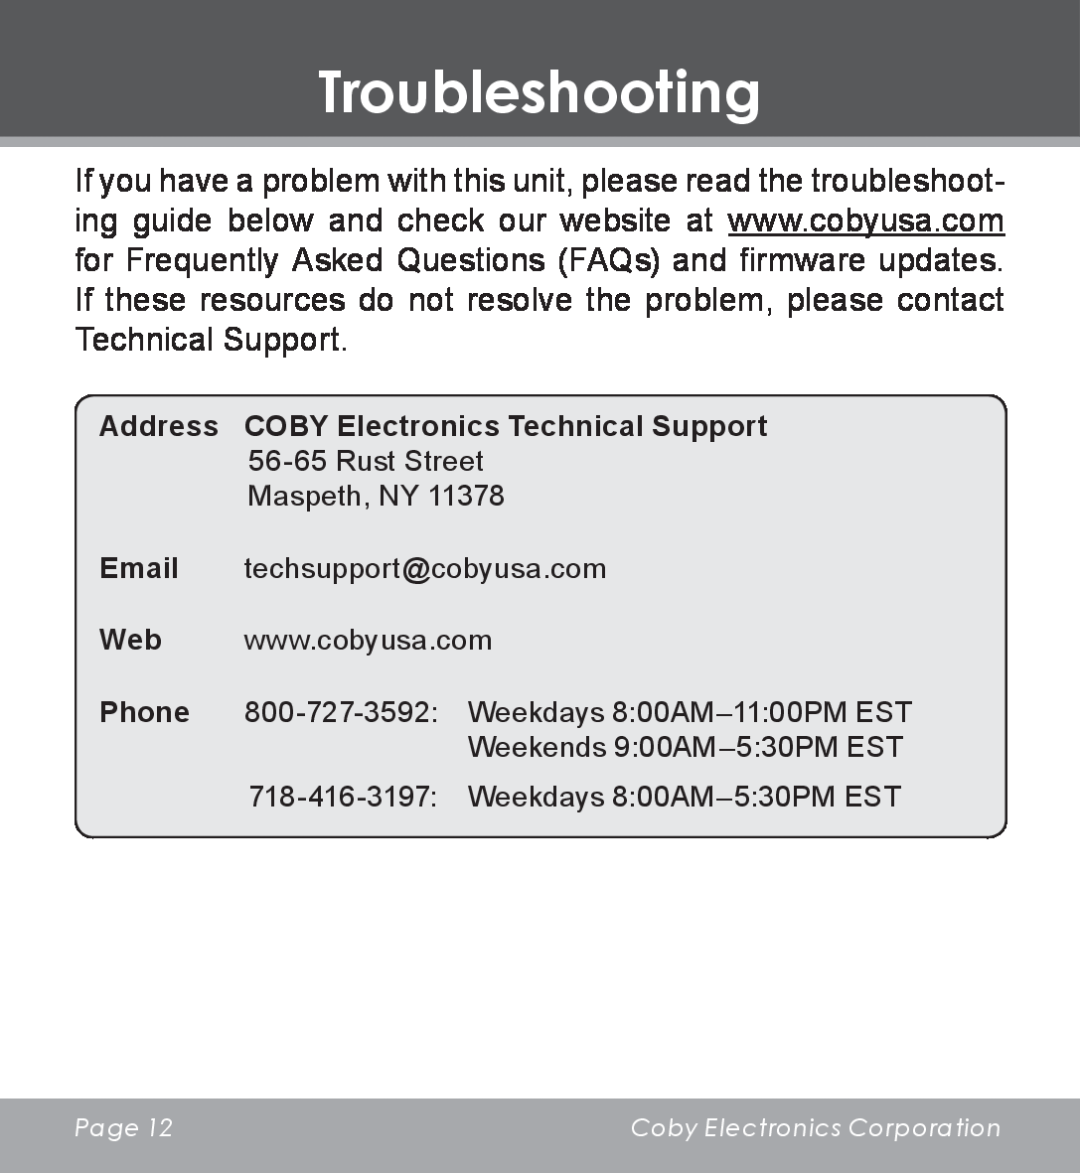 COBY electronic CV-M225 instruction manual Troubleshooting, Address COBY Electronics Technical Support, Phone 